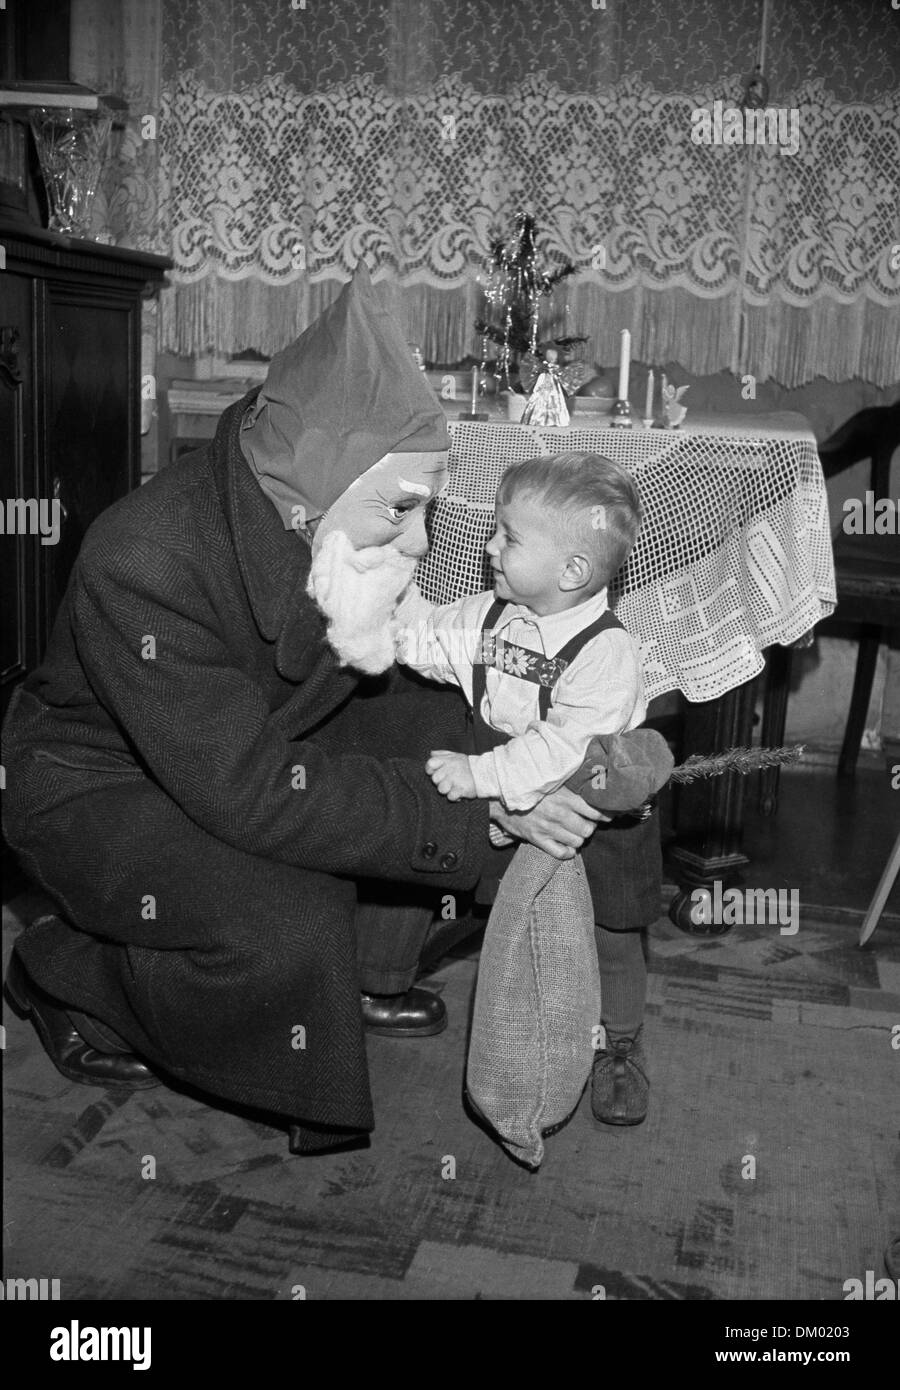 A small boy is pictured with Santa Claus on Christmas Eve in 1951. Photo: Deutsche Fotothek/Rössing Stock Photo